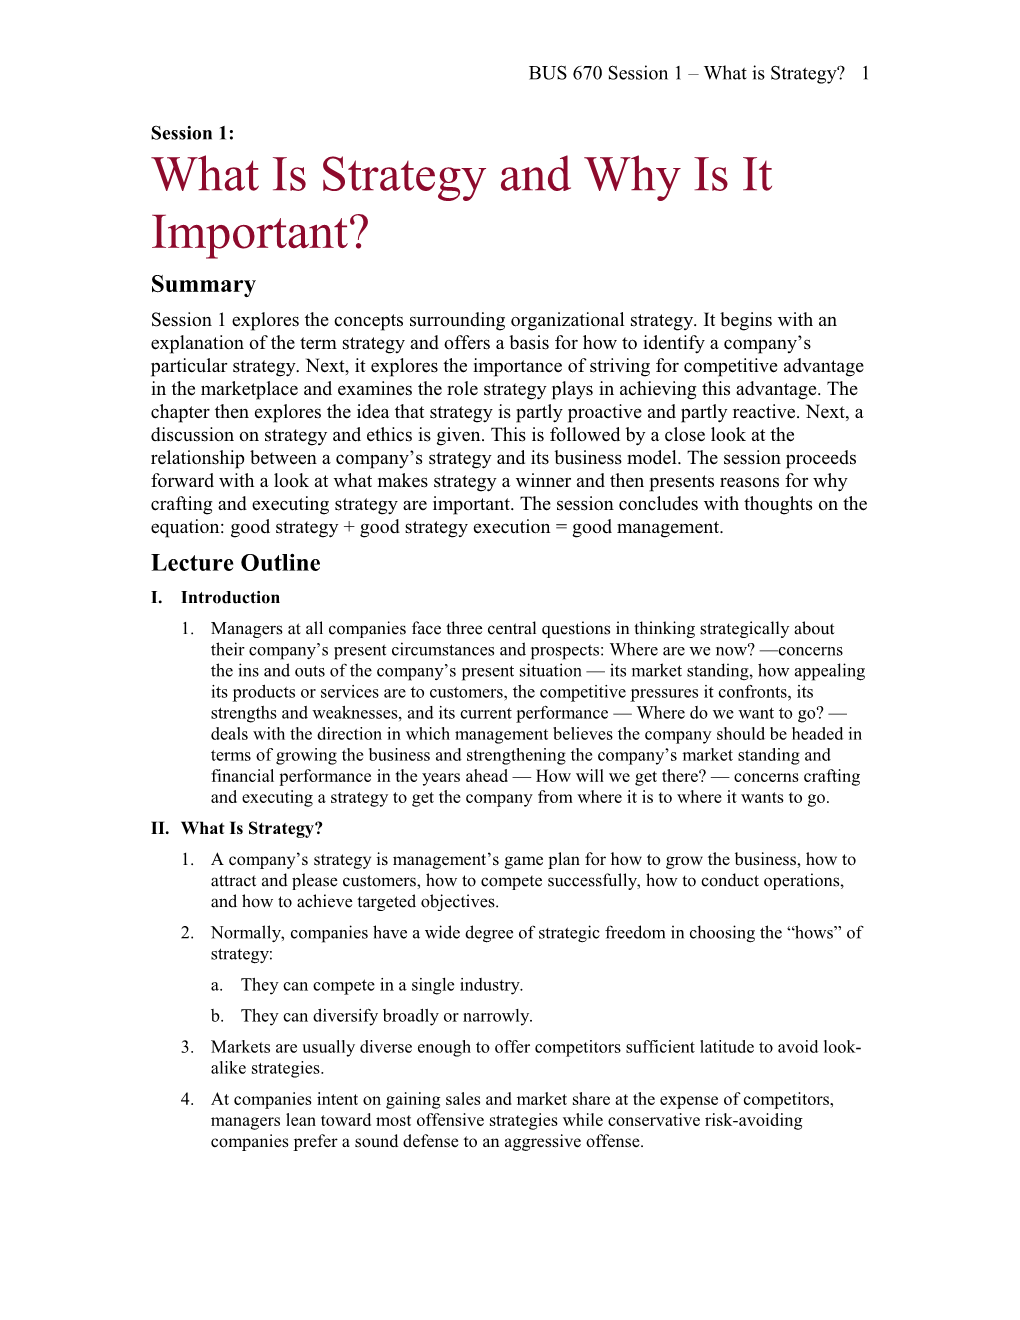 BUS 670 Session 1 What Is Strategy? 1